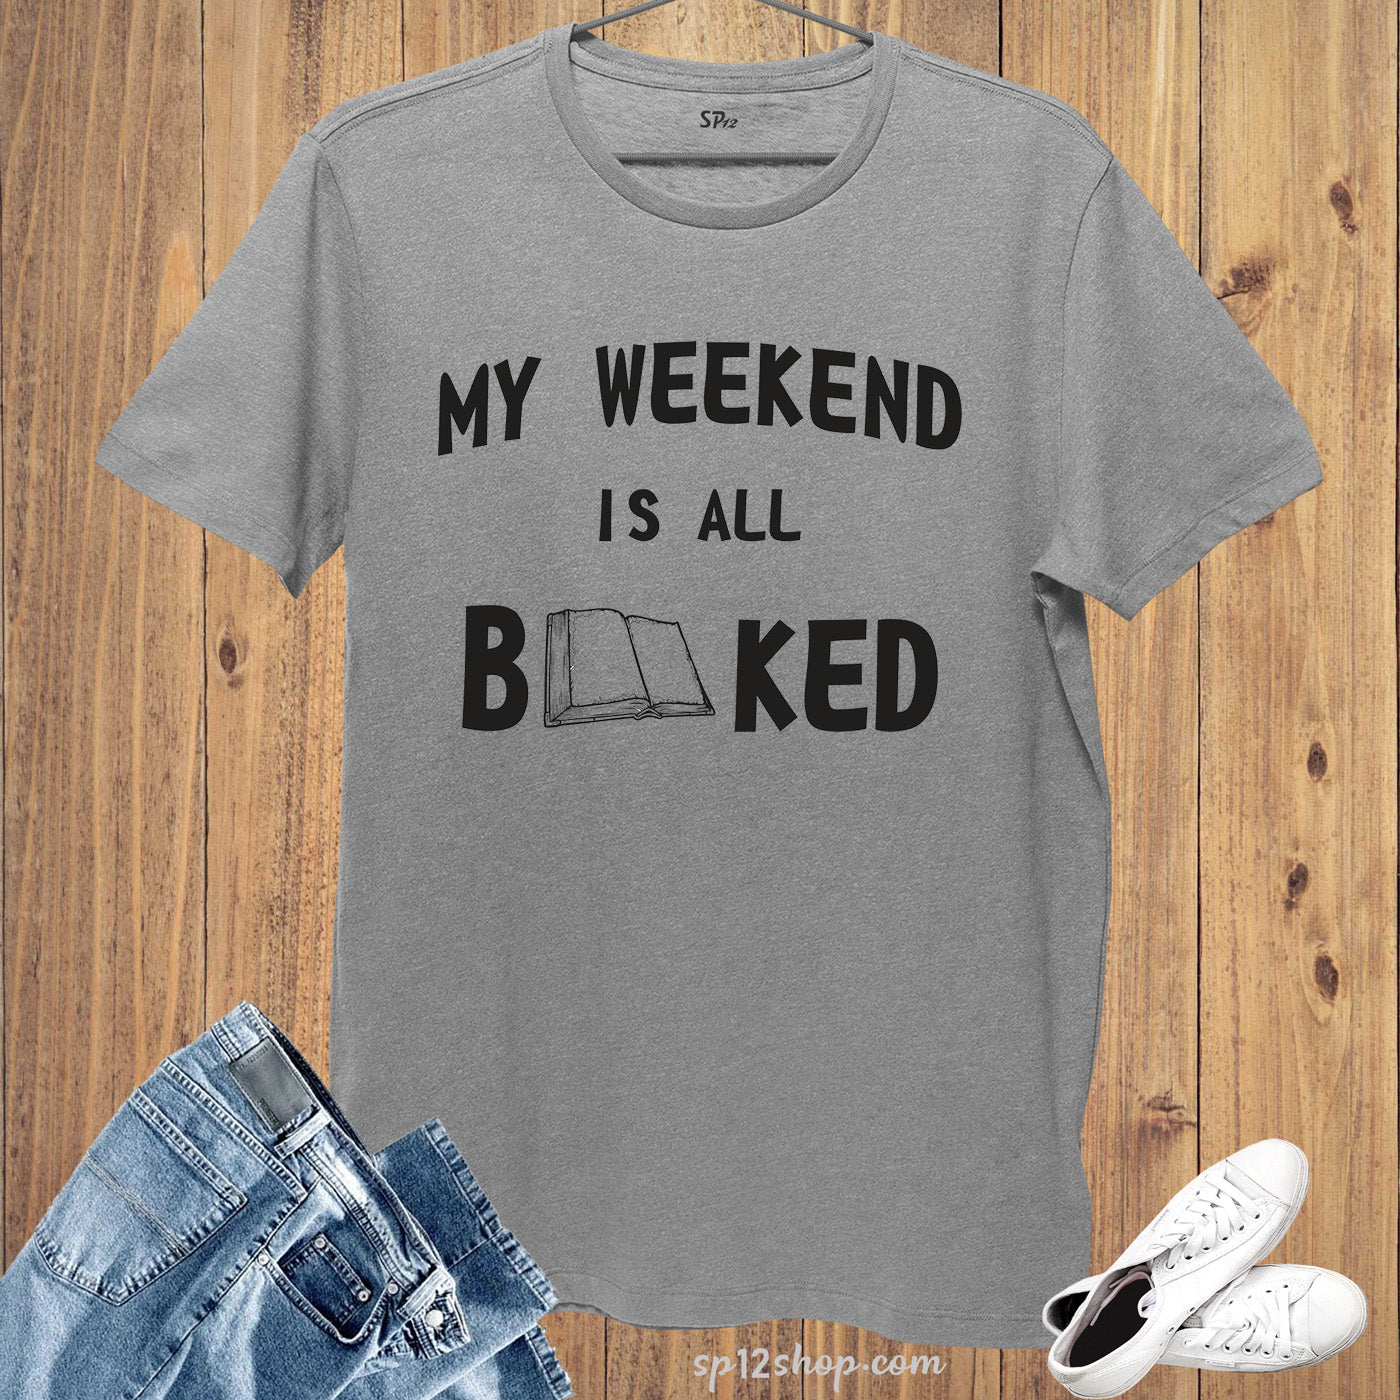 My Weekend is All Booked Slogan T-Shirt